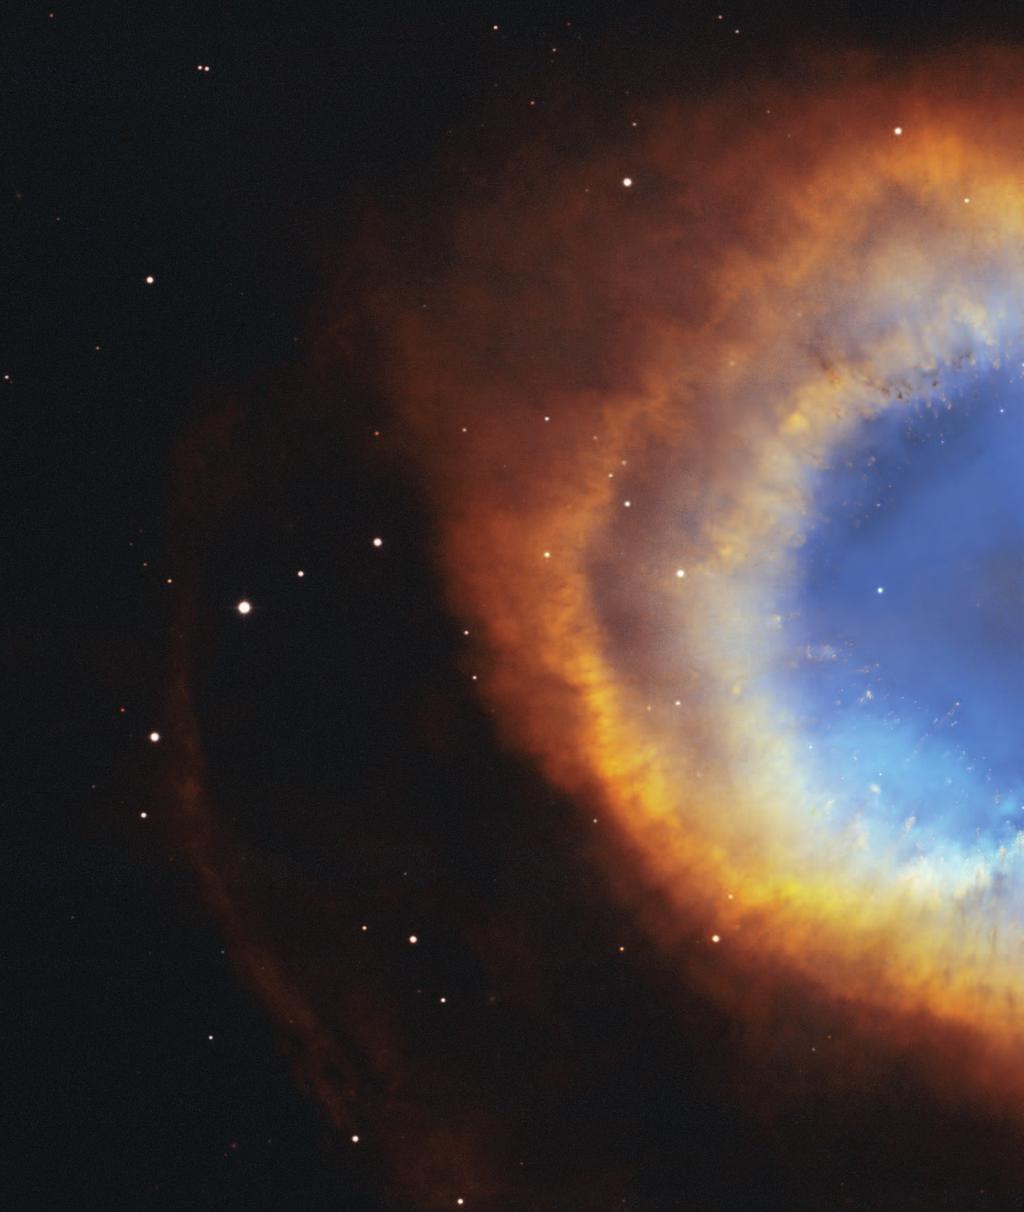 The Helix Nebula The image of the Helix Nebula shows a fine web of filamentary "bicycle-spoke" features embedded in the colourful red and blue gas ring, which is one of the